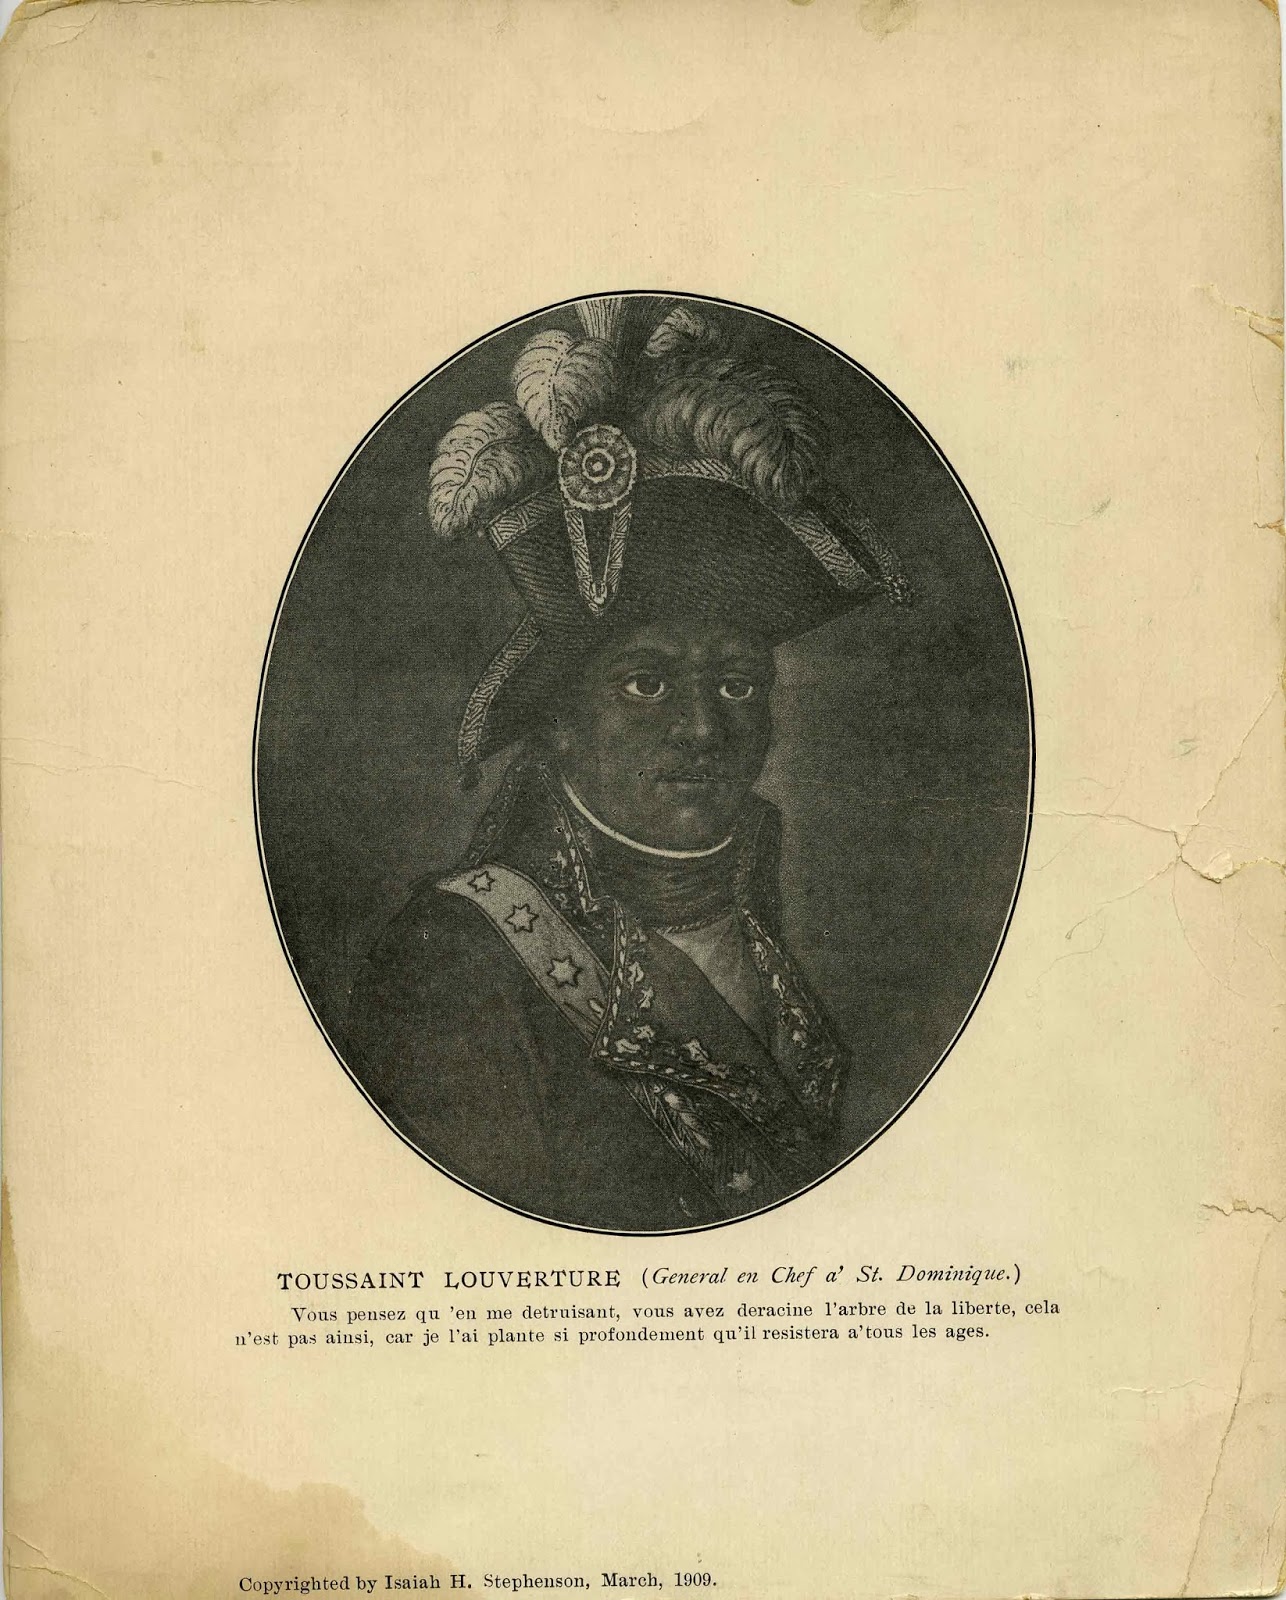 Engraving of Toussaint L’Ouverture from 1909